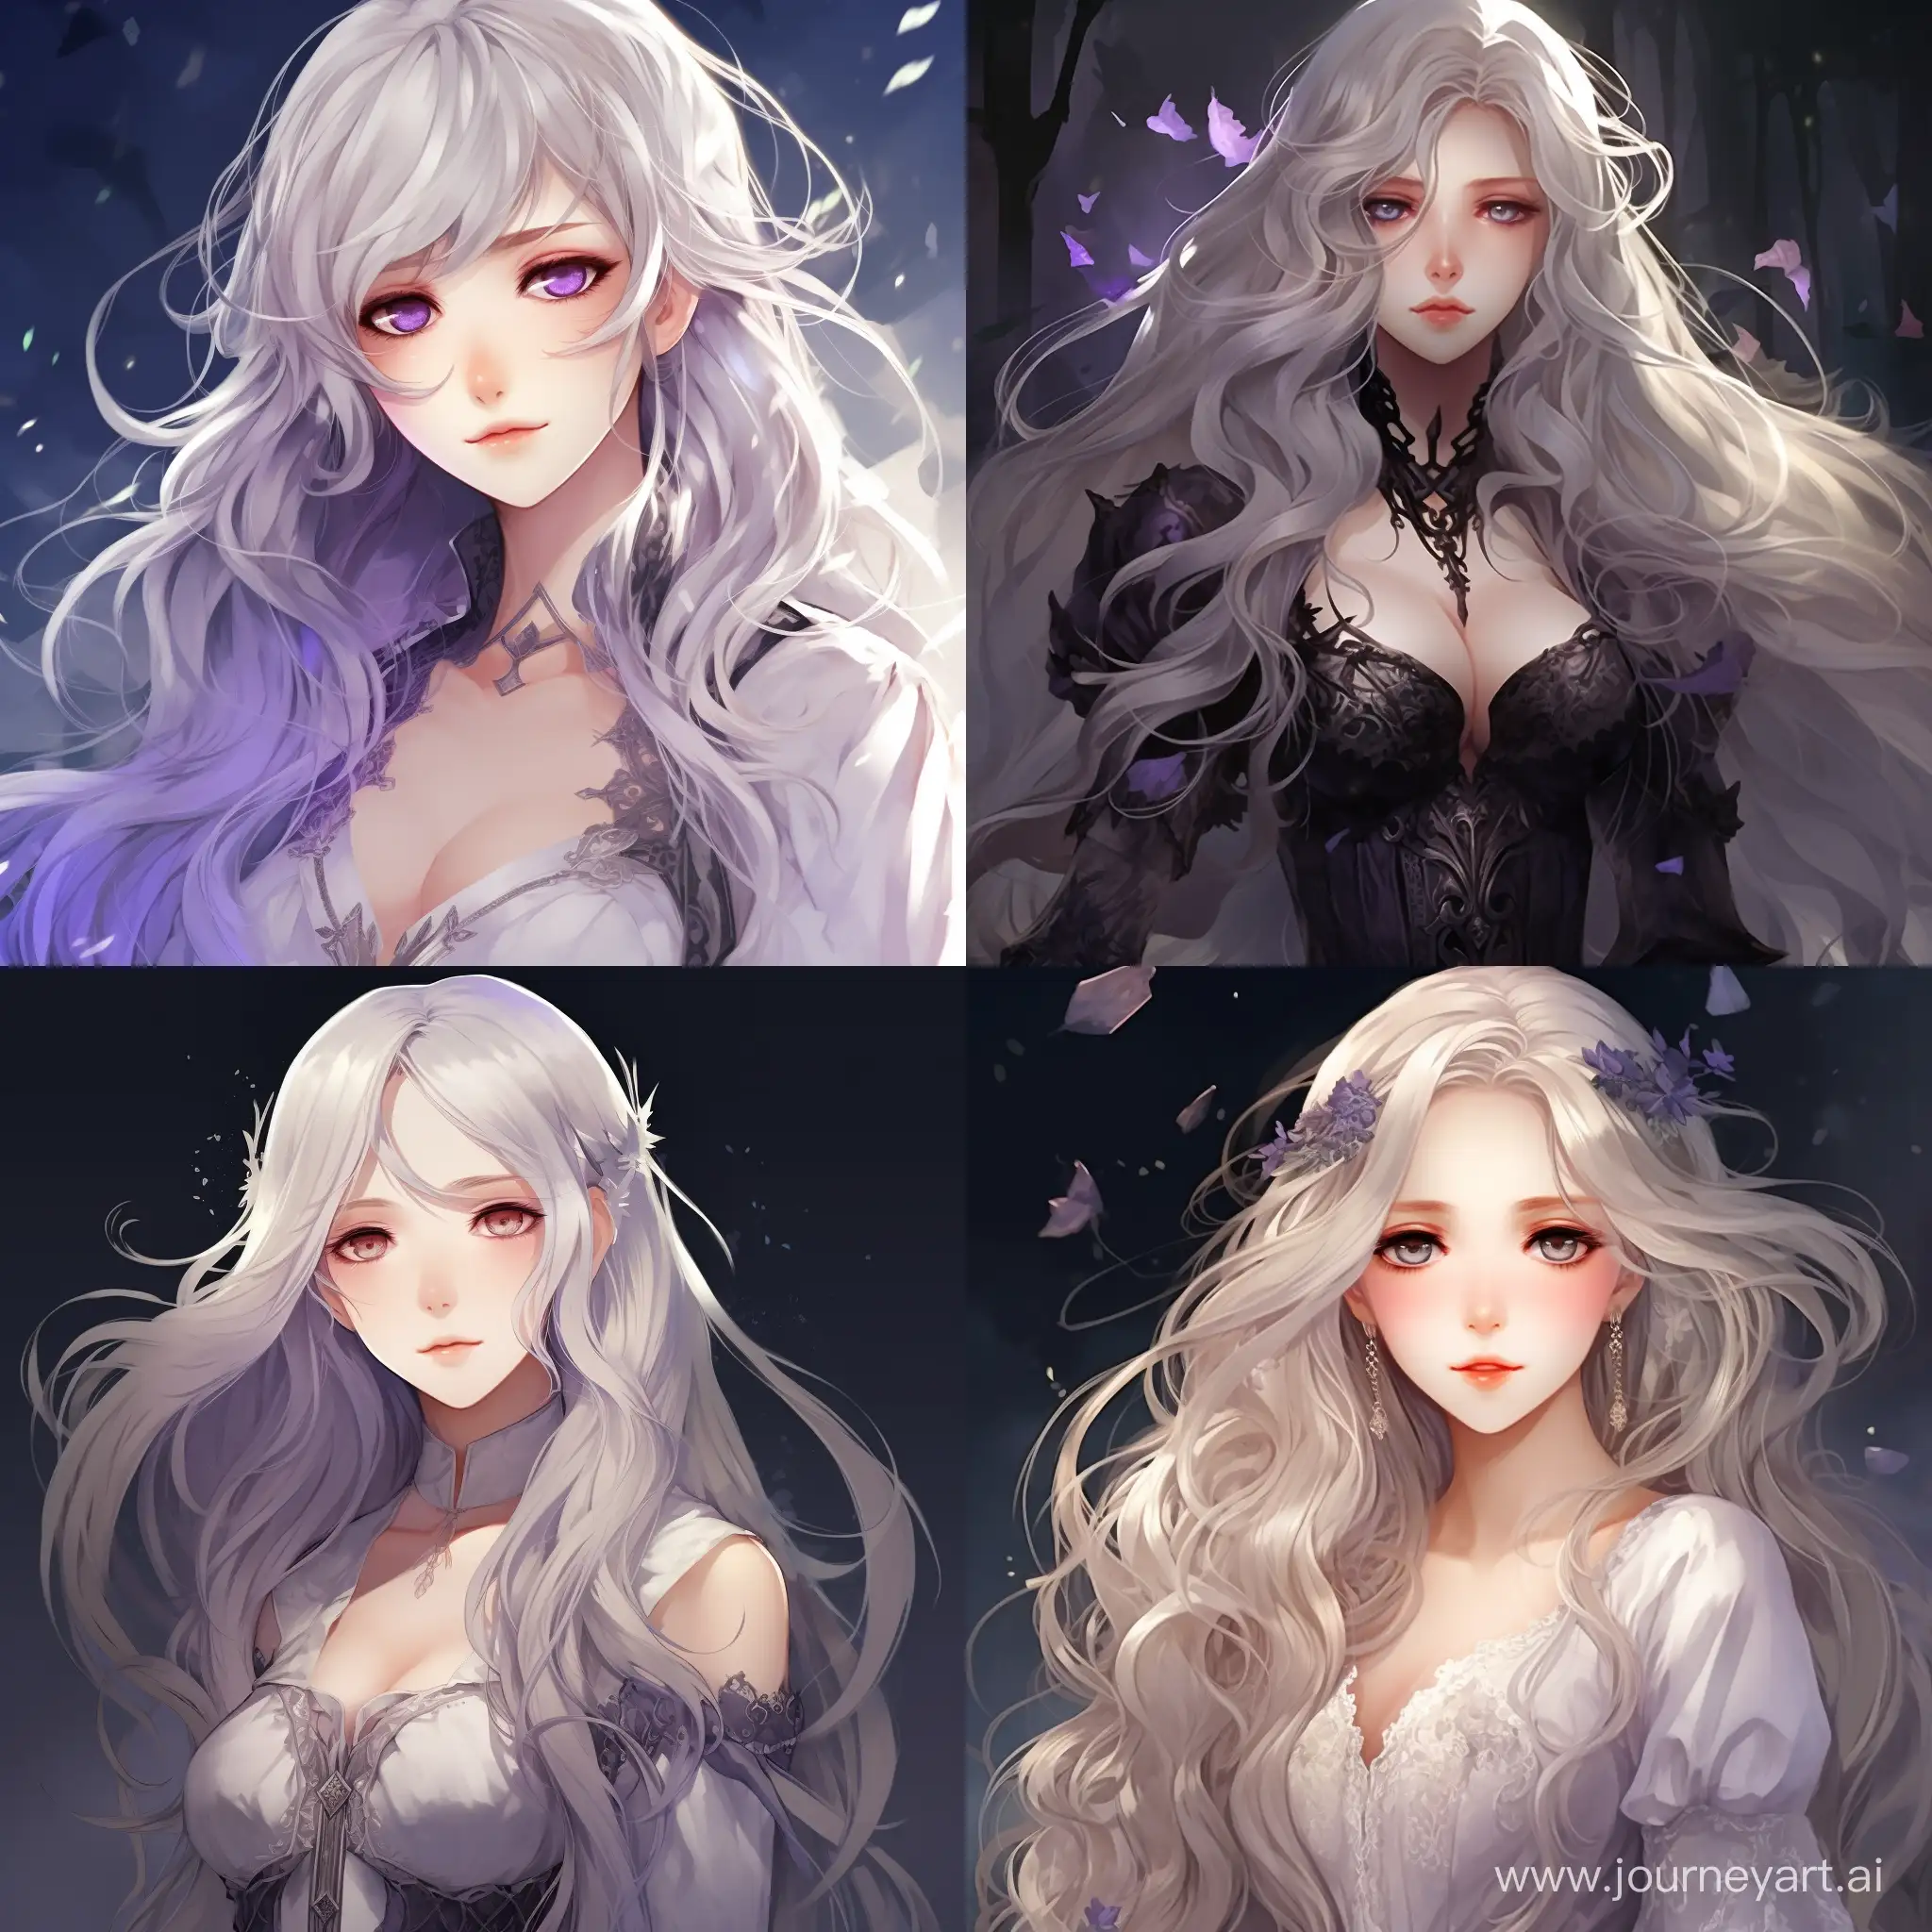 Ethereal-Anime-Woman-with-Long-White-Hair-and-Purple-Eyes